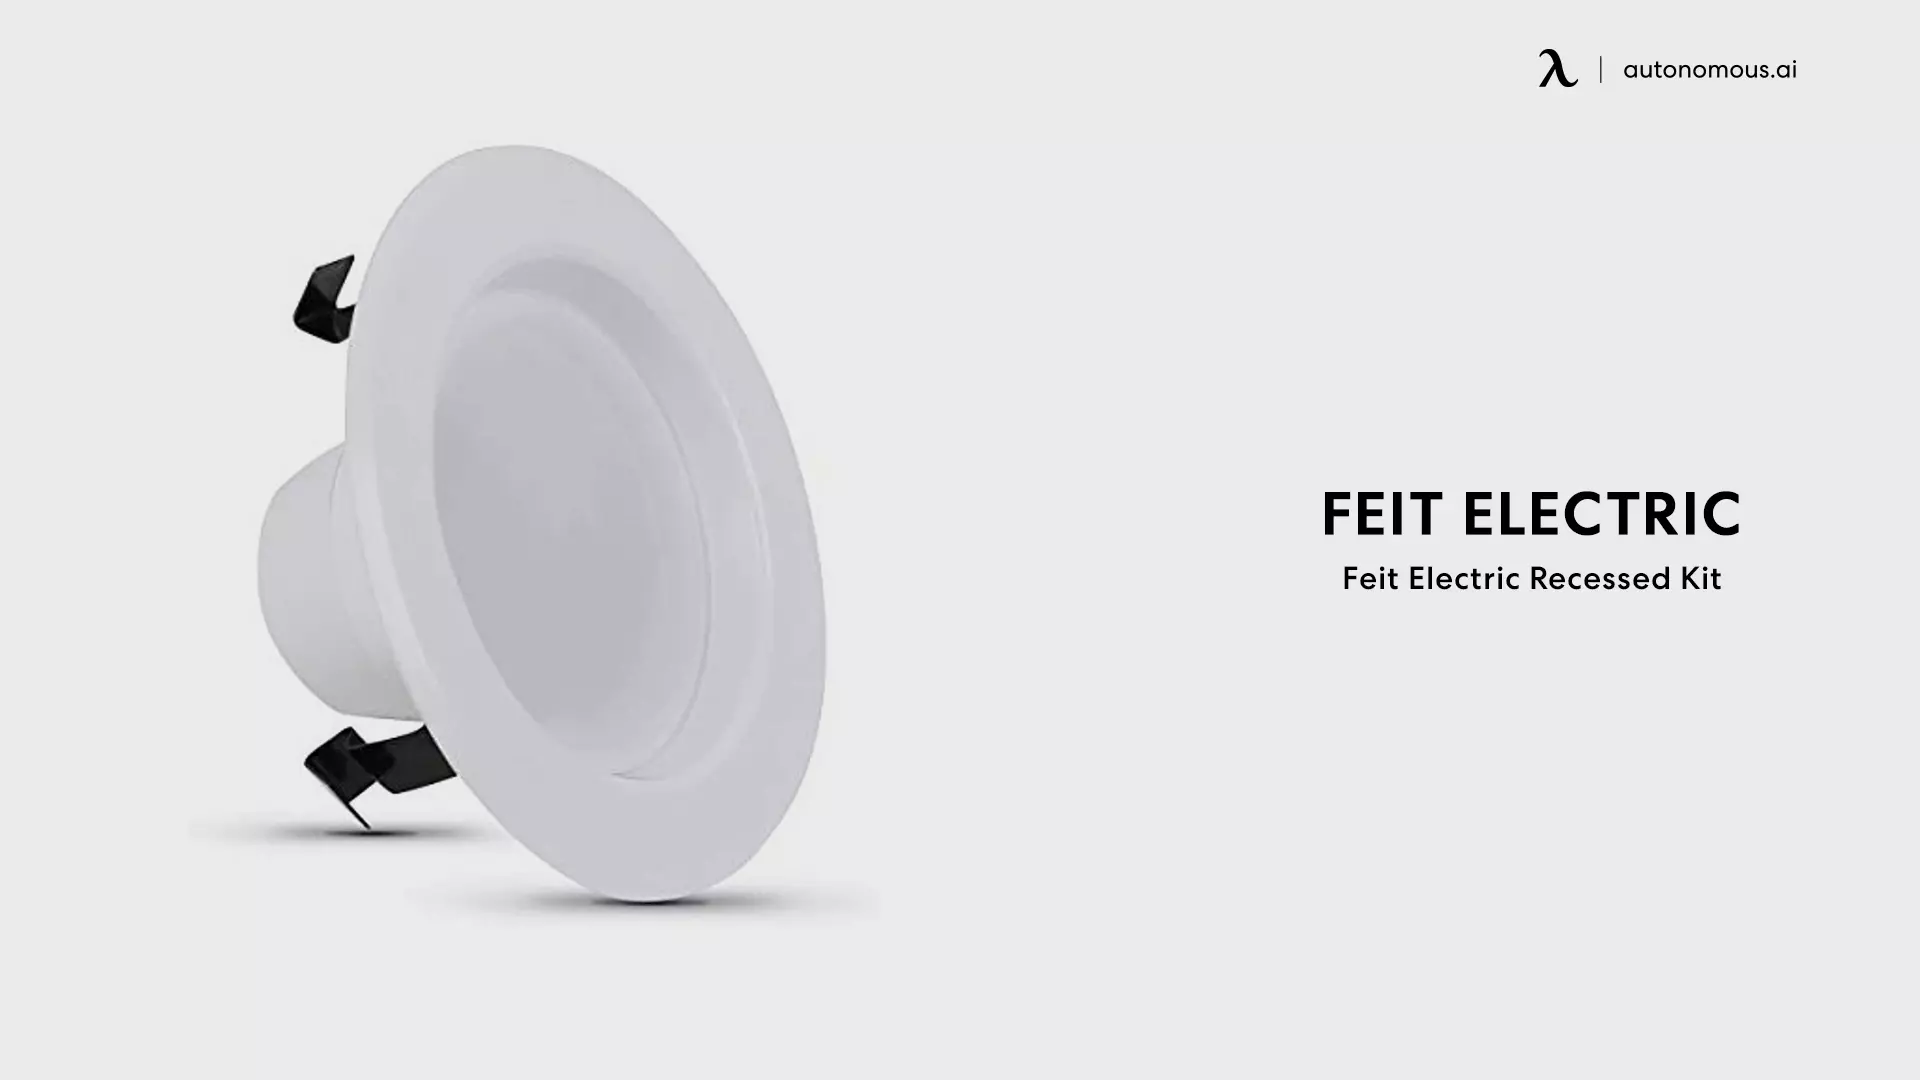 Feit Electric Recessed Kit